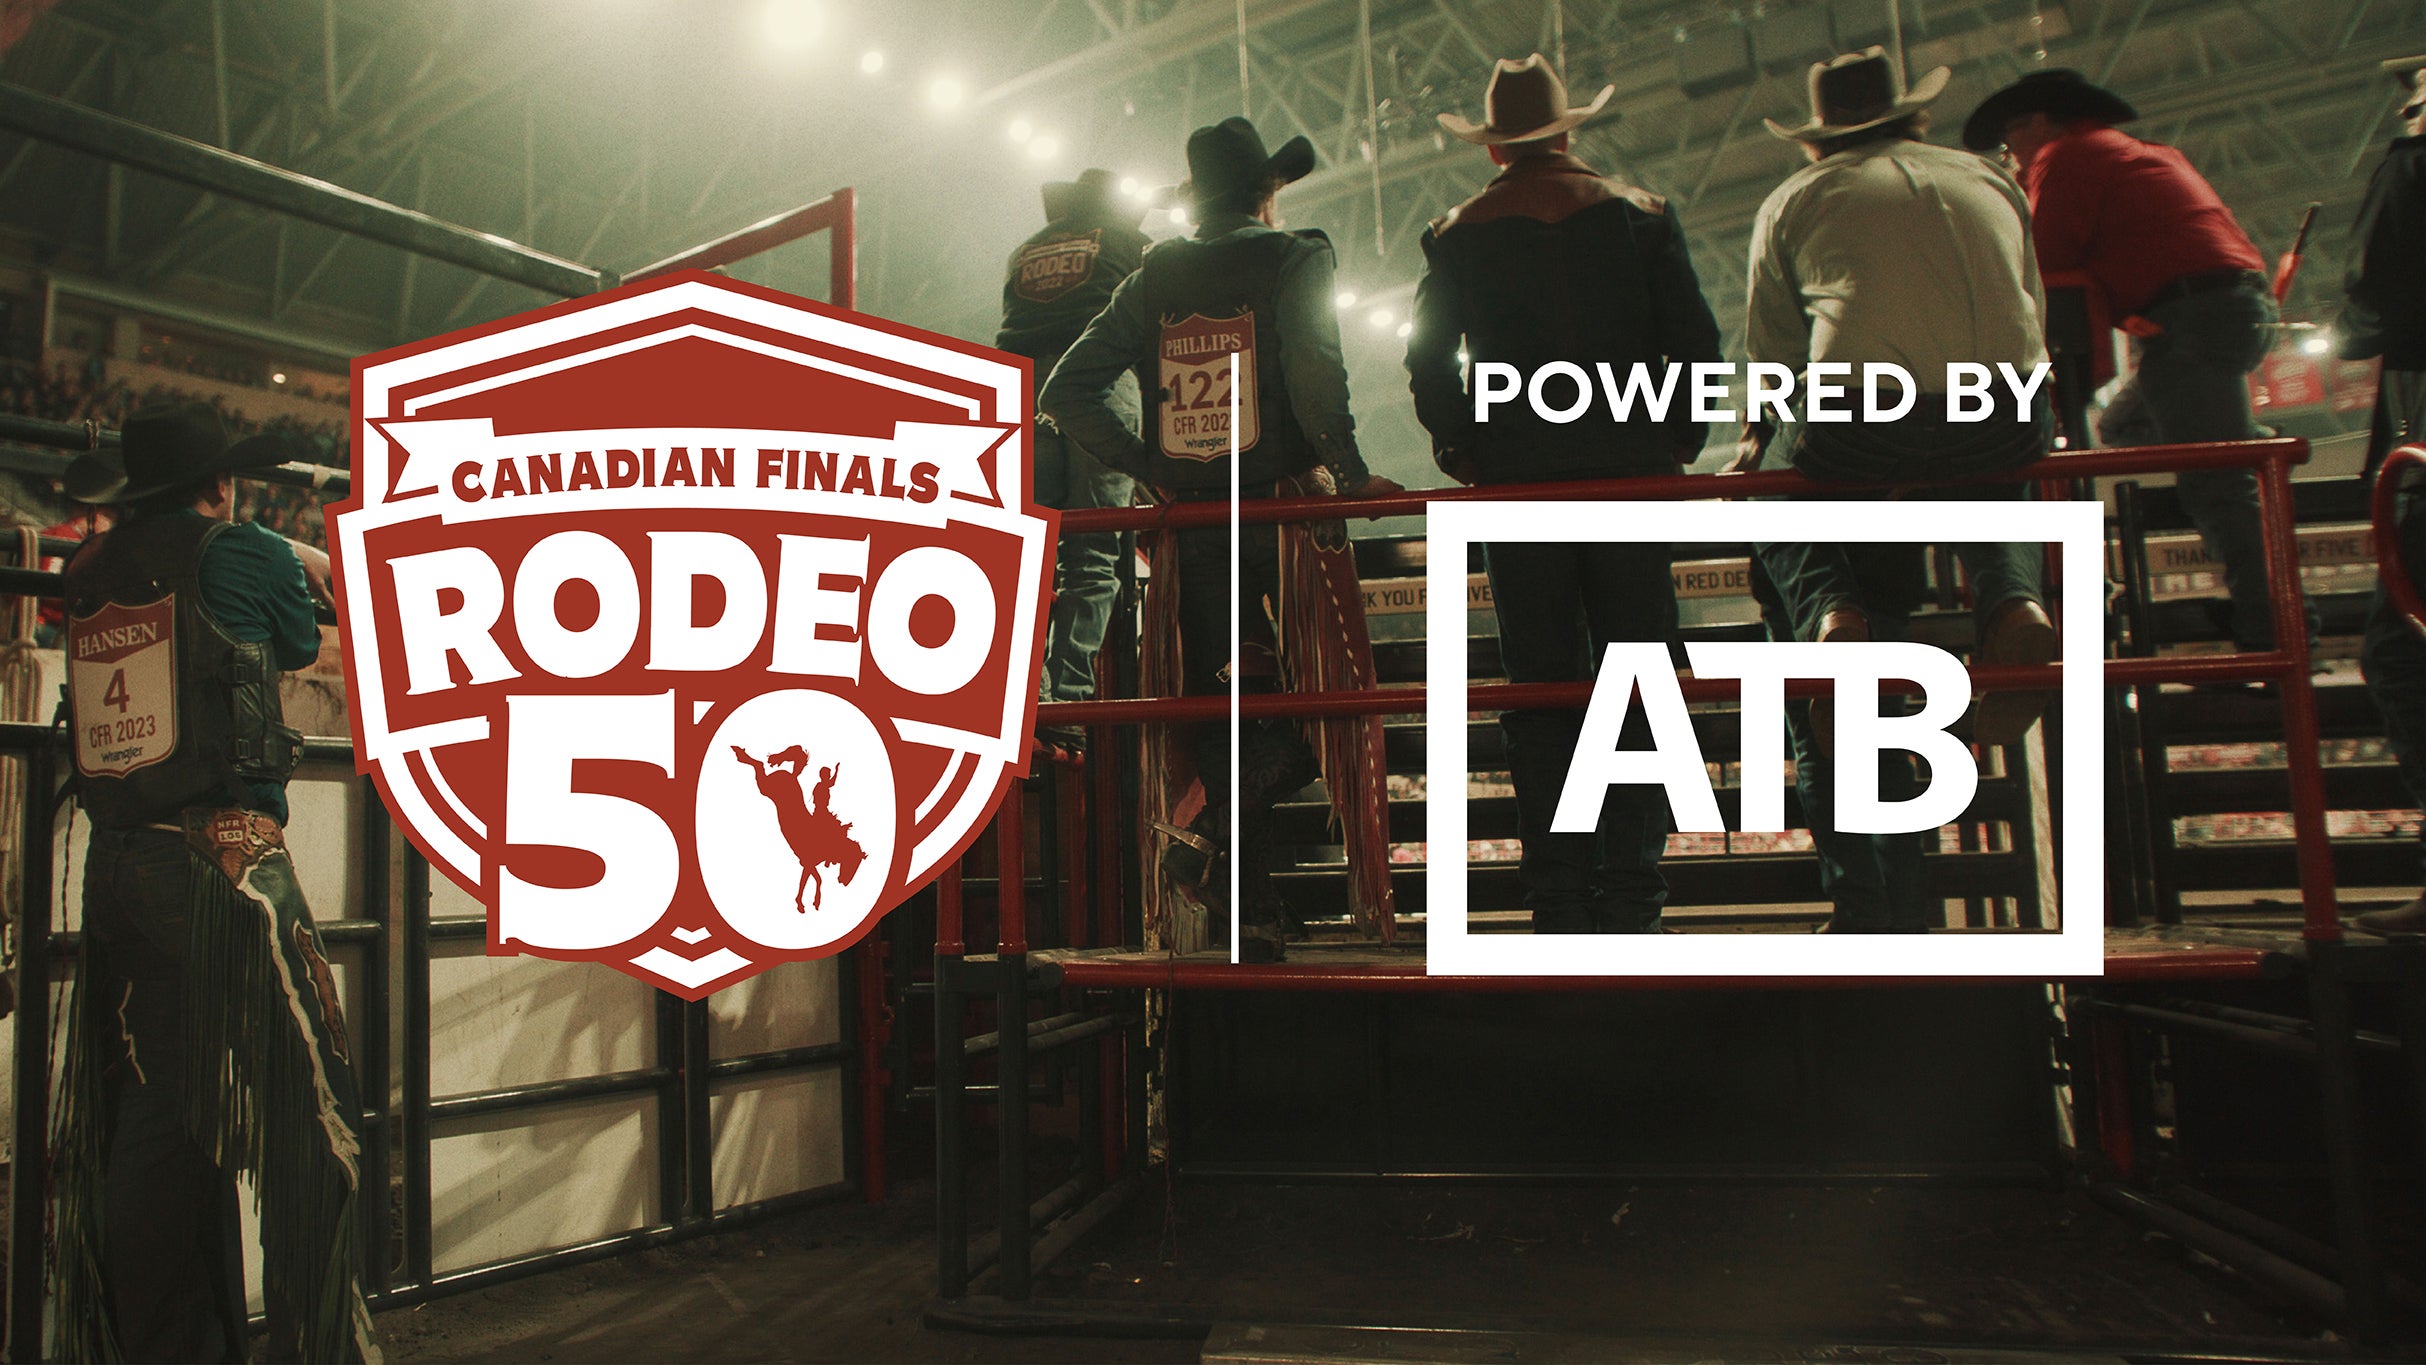 Canadian Finals Rodeo powered by ATB in Edmonton promo photo for Presales presale offer code